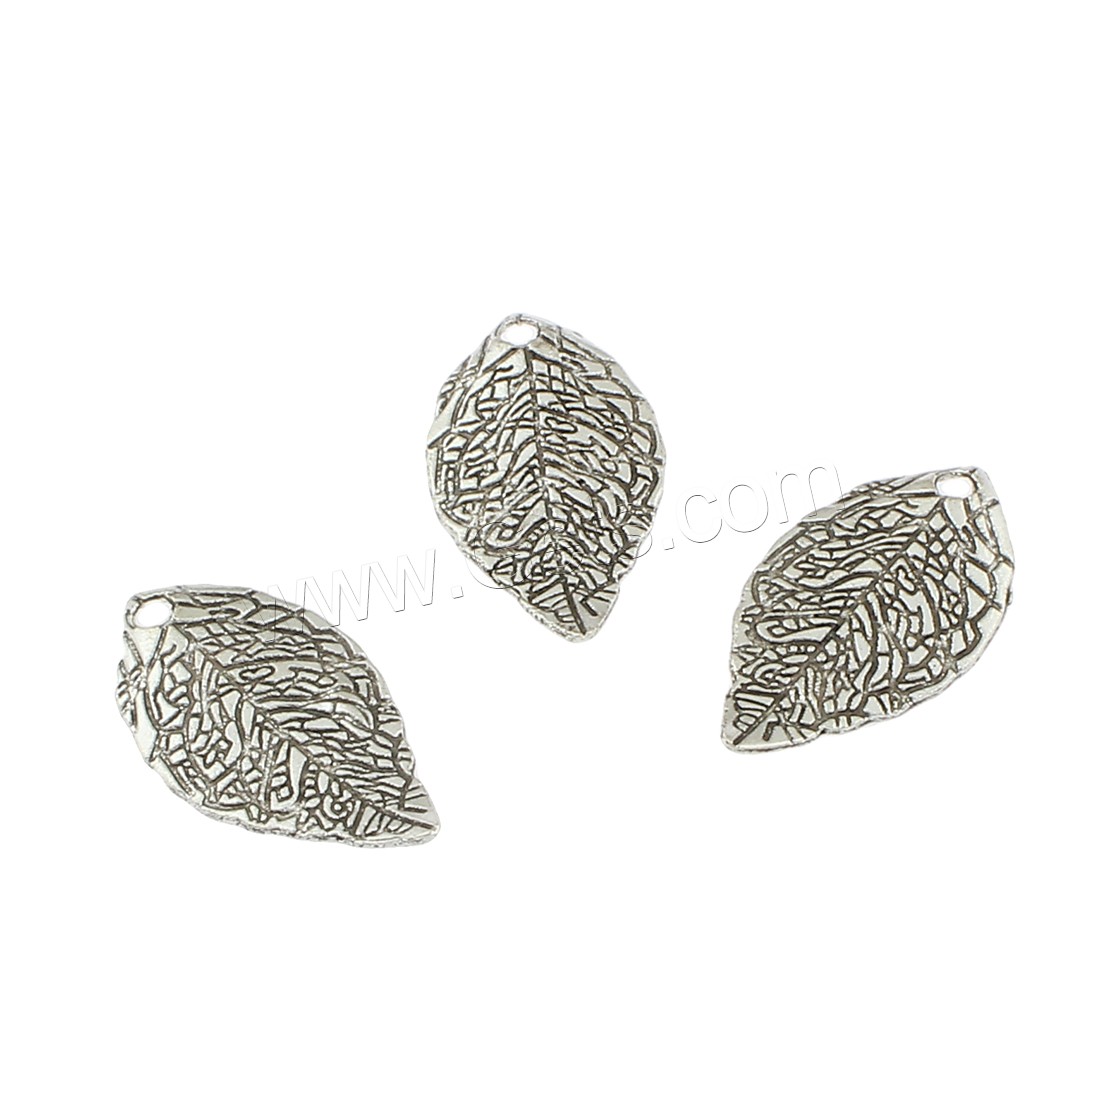 Zinc Alloy Leaf Pendants, antique silver color plated, 14x25x3mm, Hole:Approx 1mm, Approx 500PCs/Bag, Sold By Bag